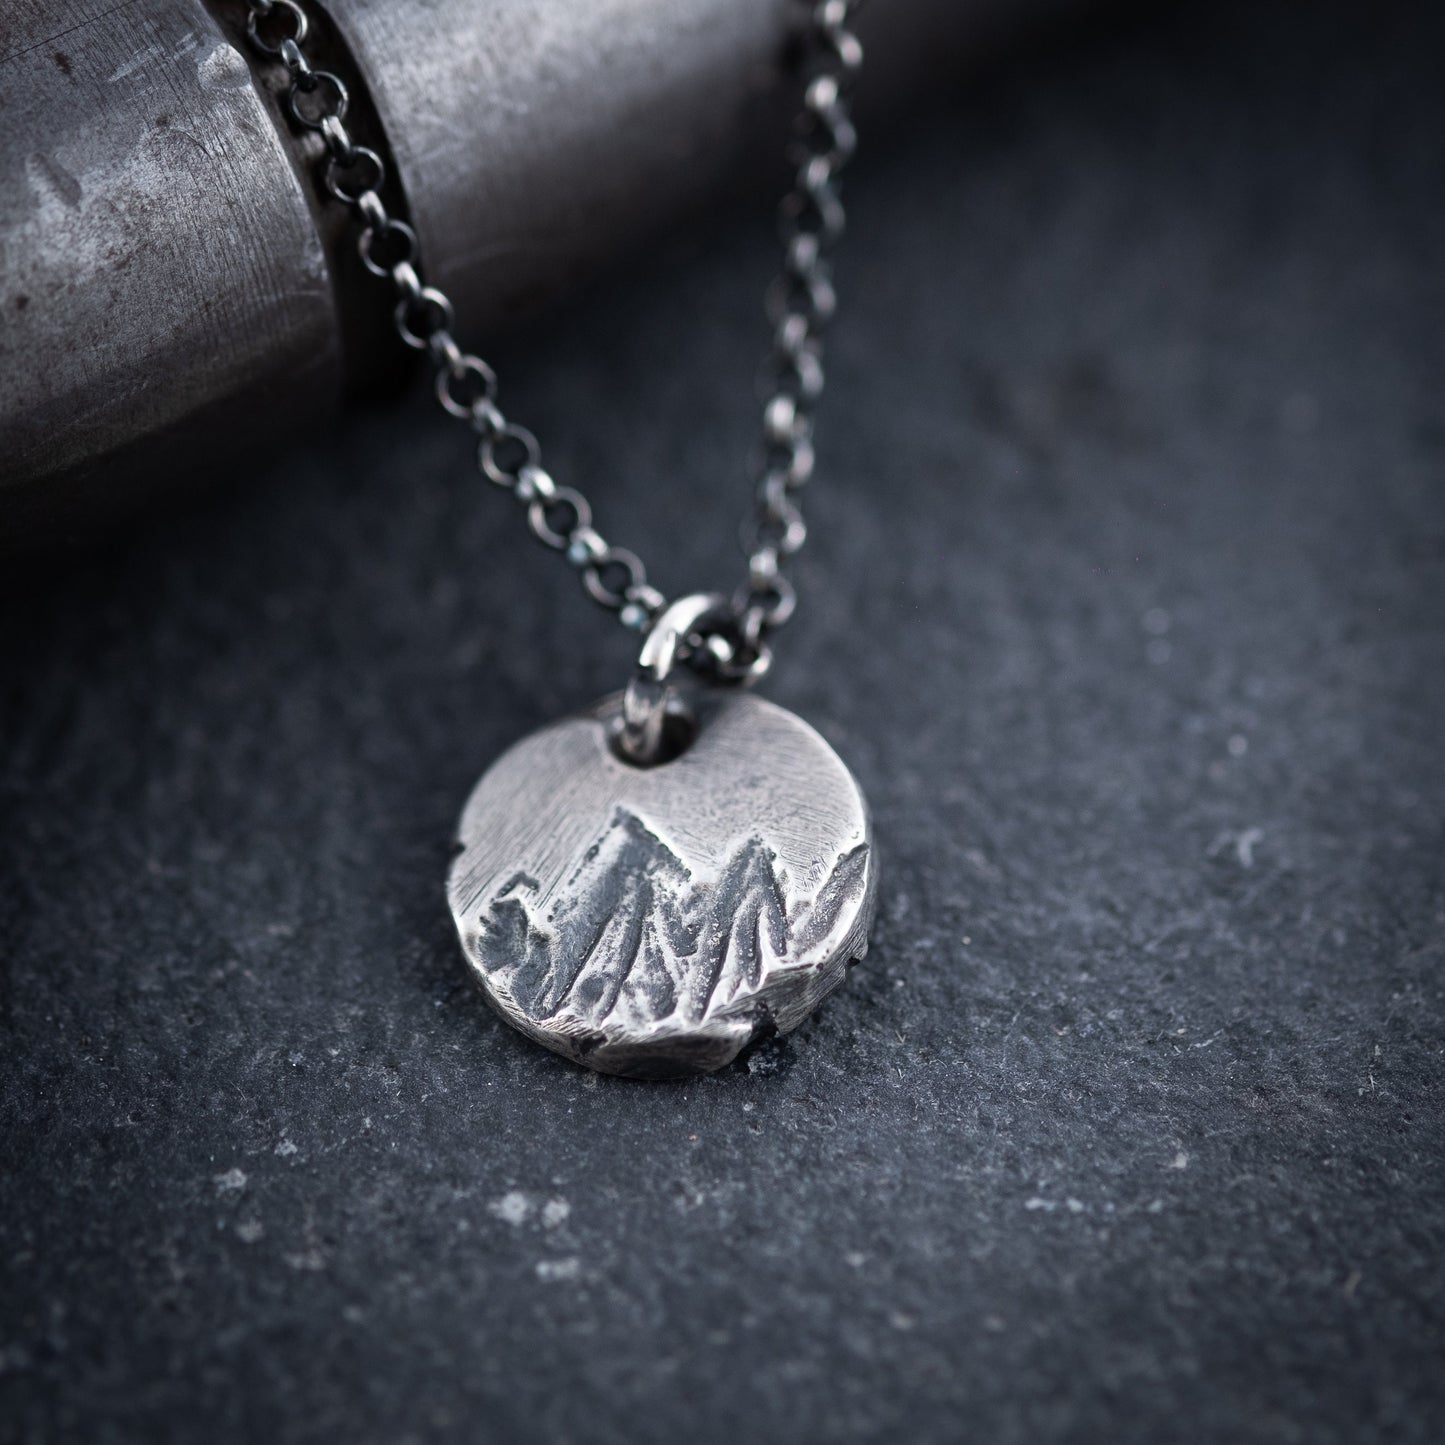 Rustic Circle Mountain Silver Necklace, Wanderlust Hiking Mens Adventure necklace, Travel Gifts, Mens pendant necklace, Handmade  jewelry